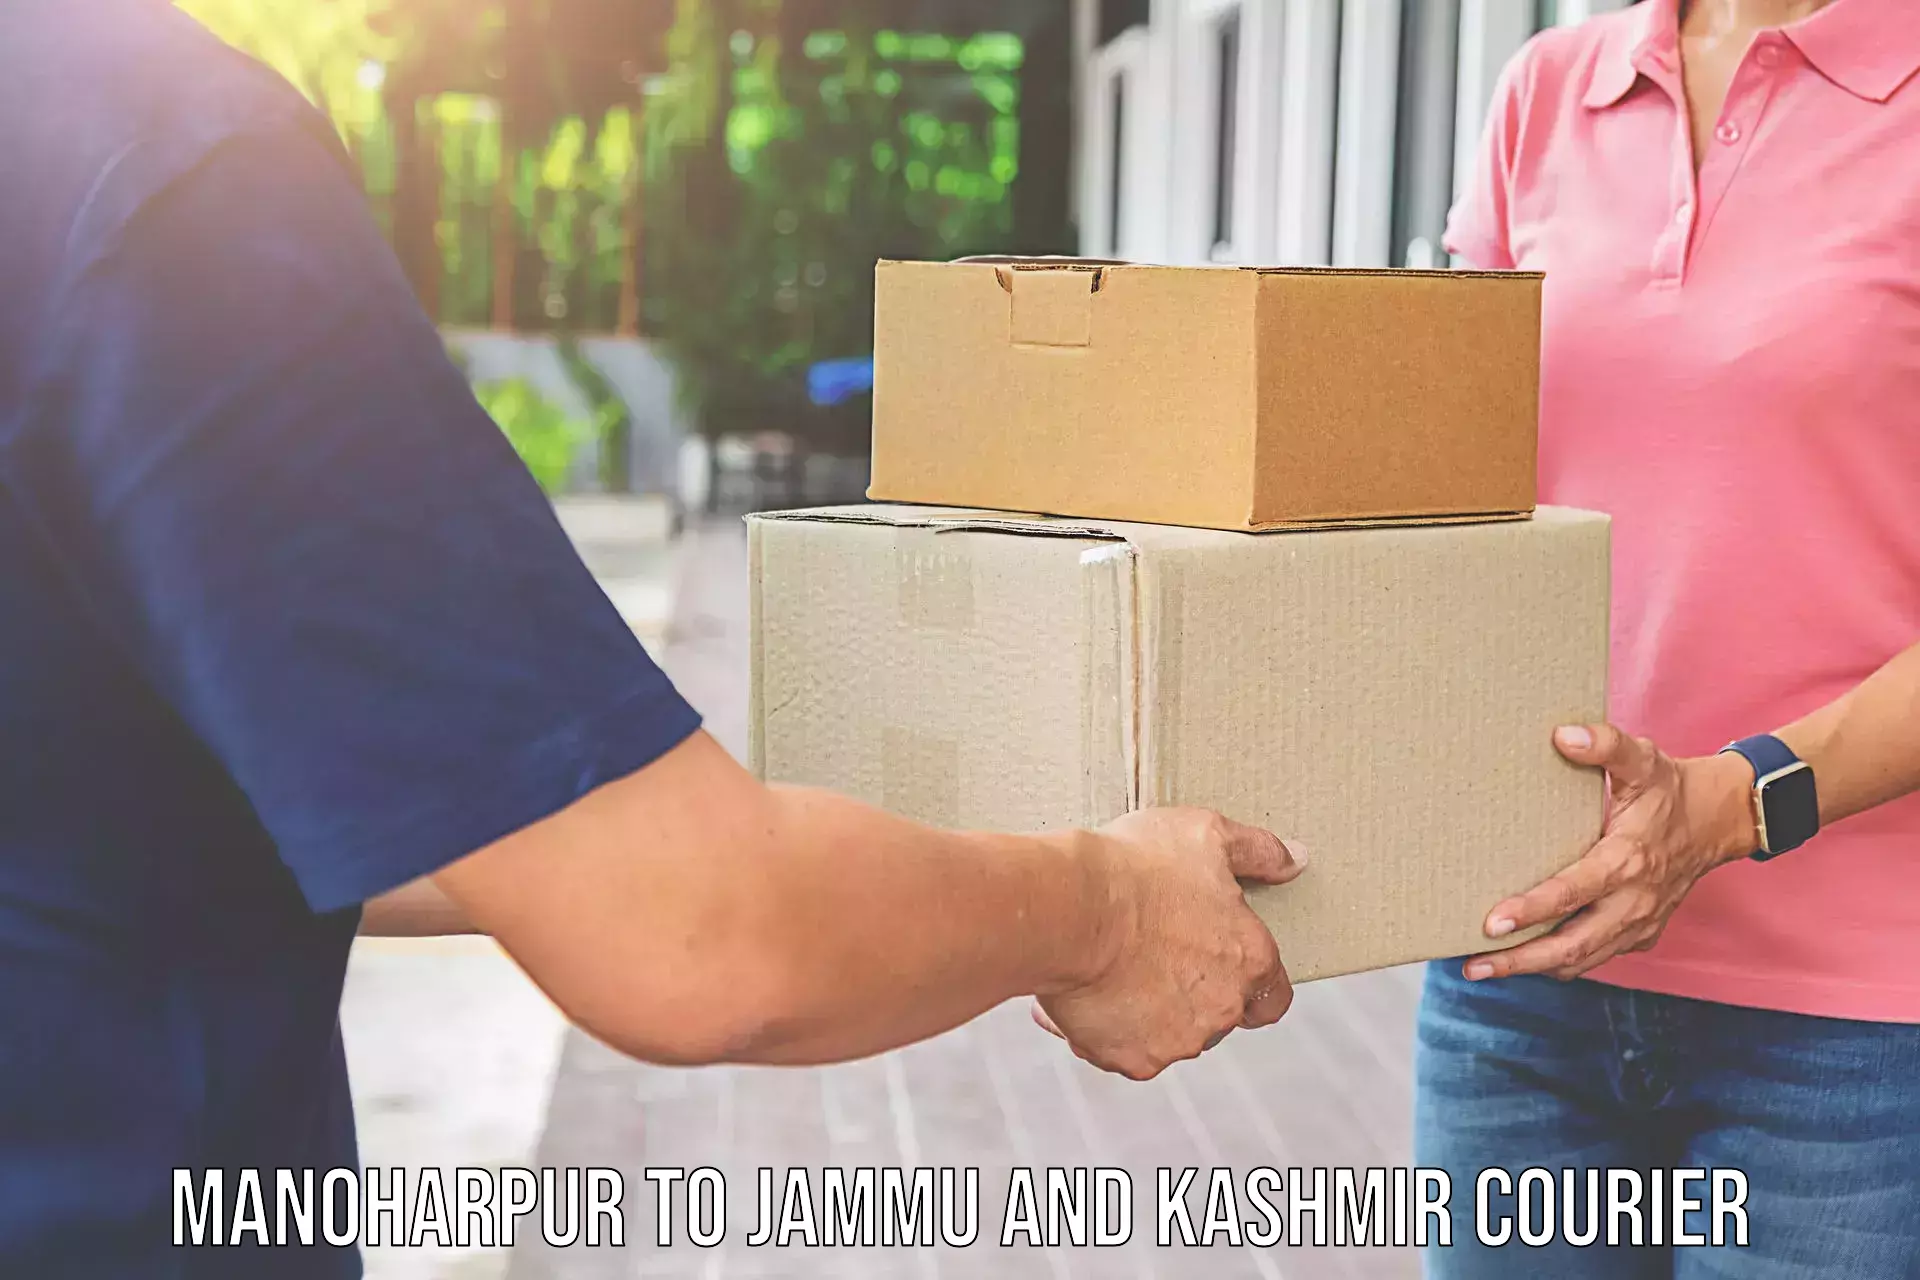 Furniture delivery service Manoharpur to Udhampur